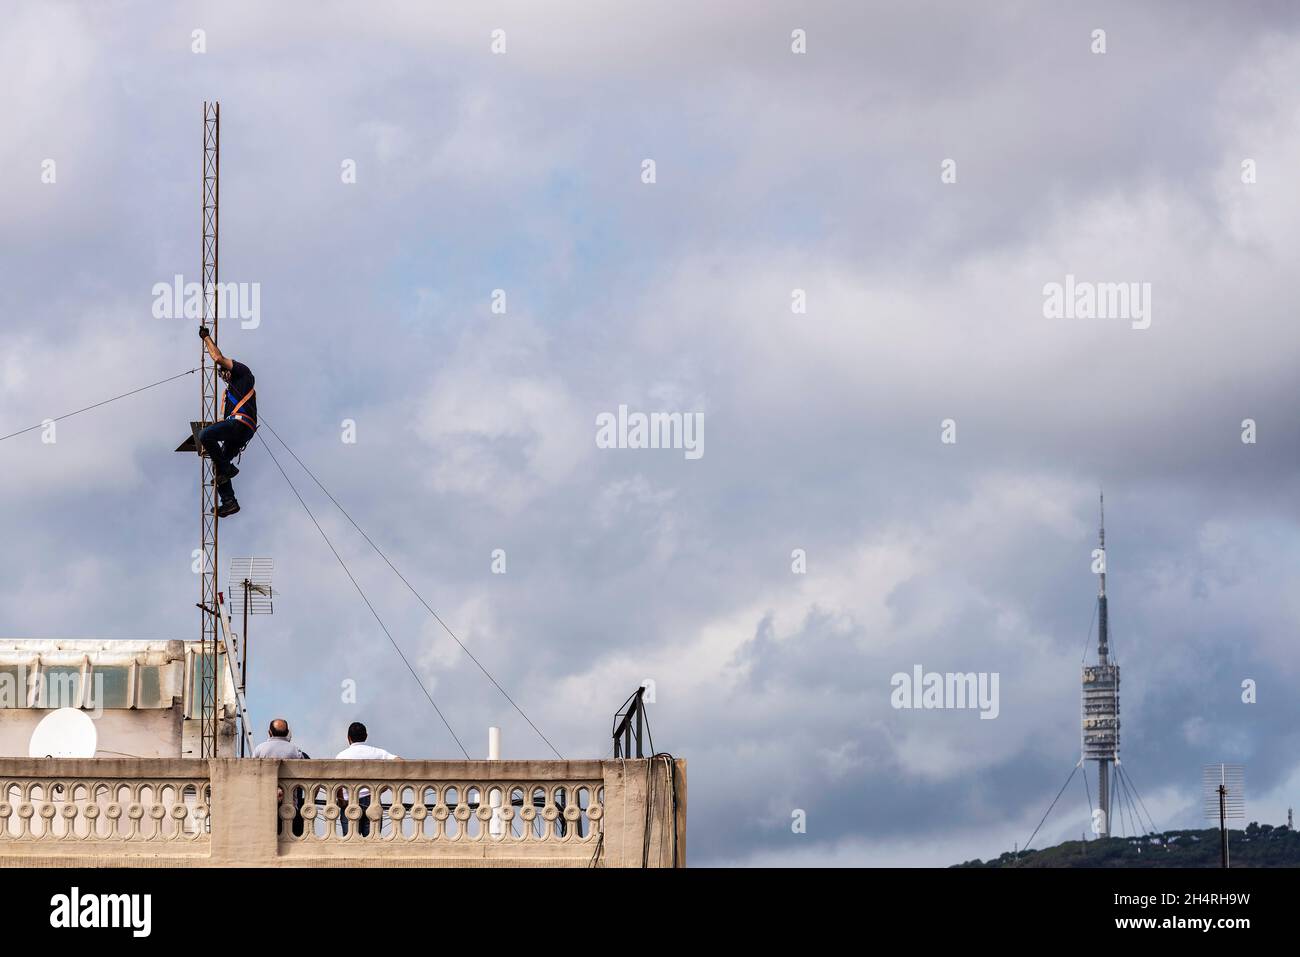 Barcelona, Spain - October 1, 2021: Torre de Collserola and a construction worker disassembling an antenna on the roof of a residential building in Ba Stock Photo